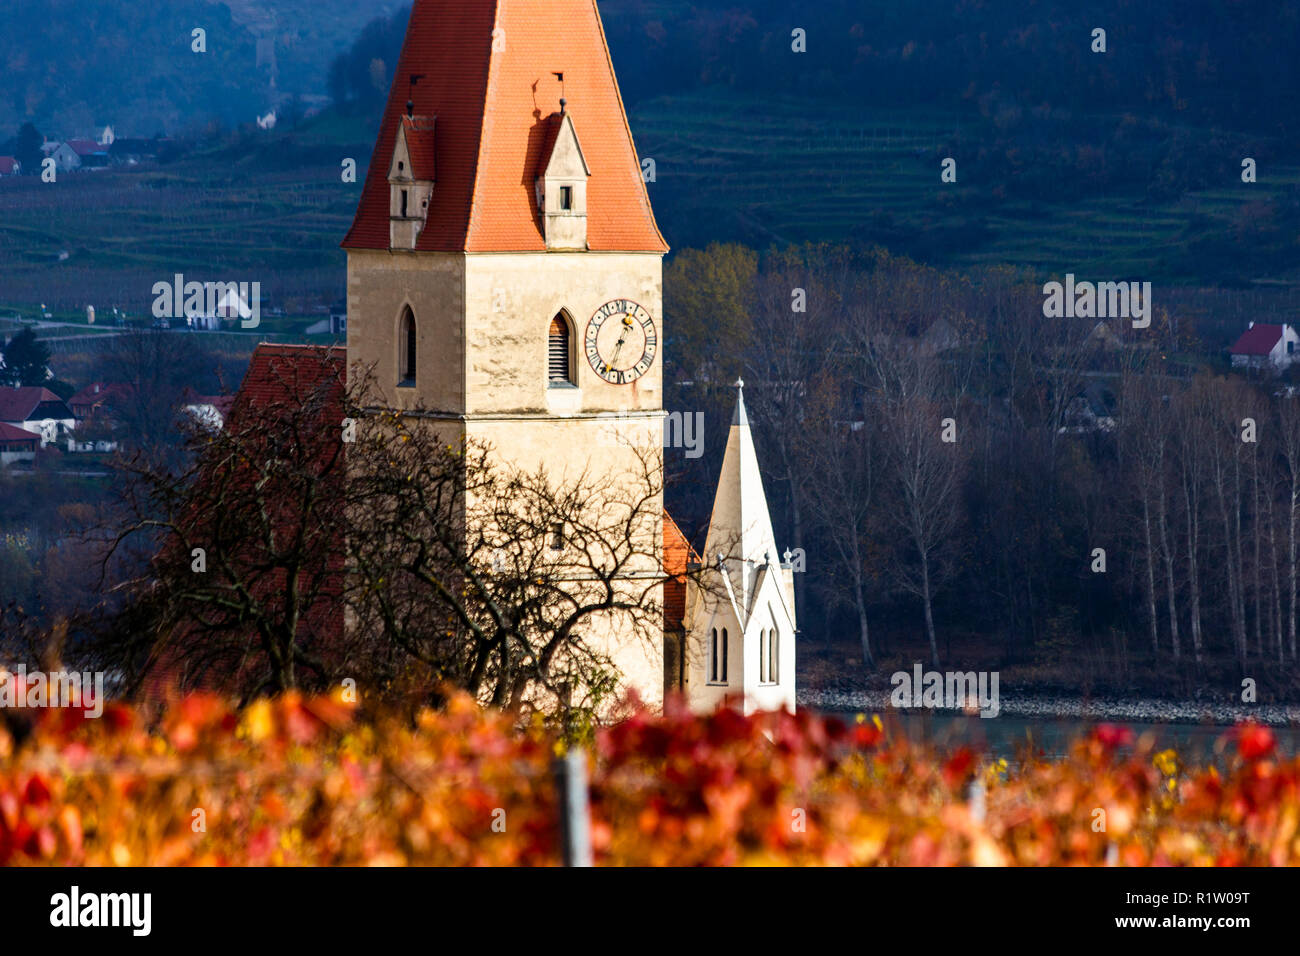 Weissenkirchen. Wachau valley. Lower Austria. Autumn colored leaves and vineyards on a sunny day. Stock Photo